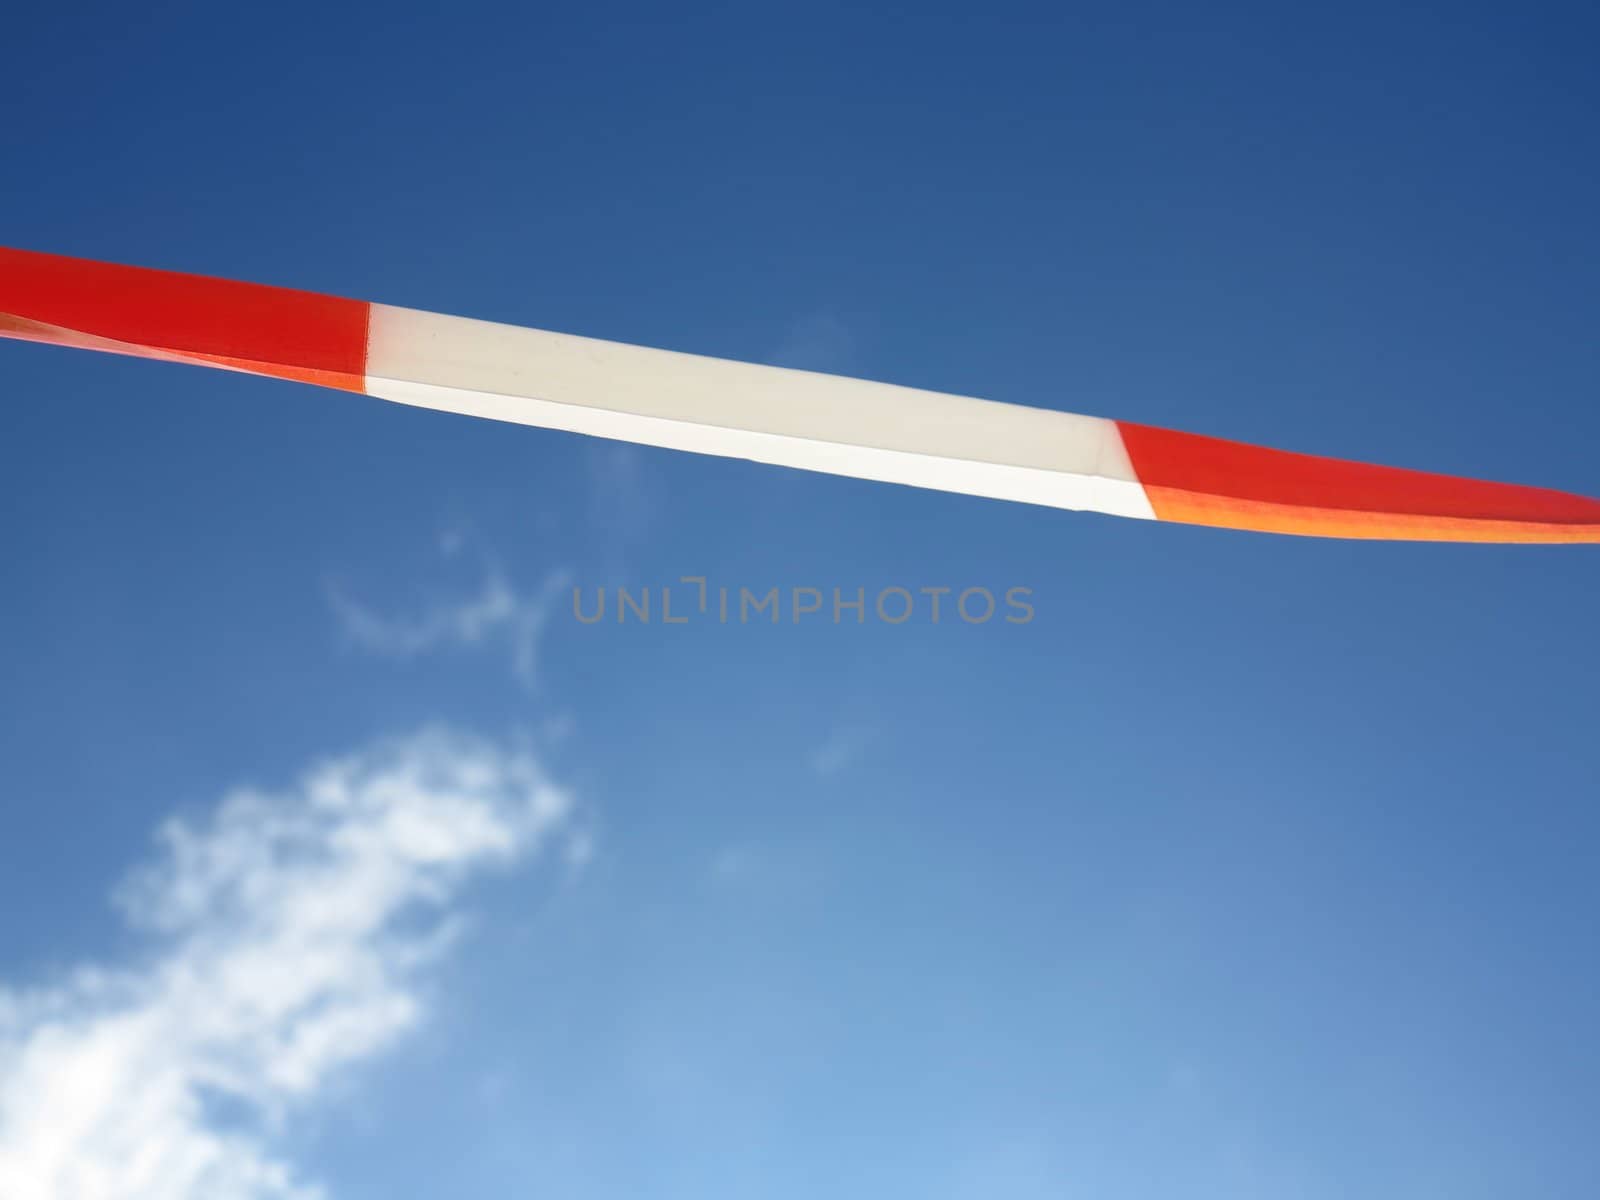 Set of red and white glossy barrier tapes against the sky